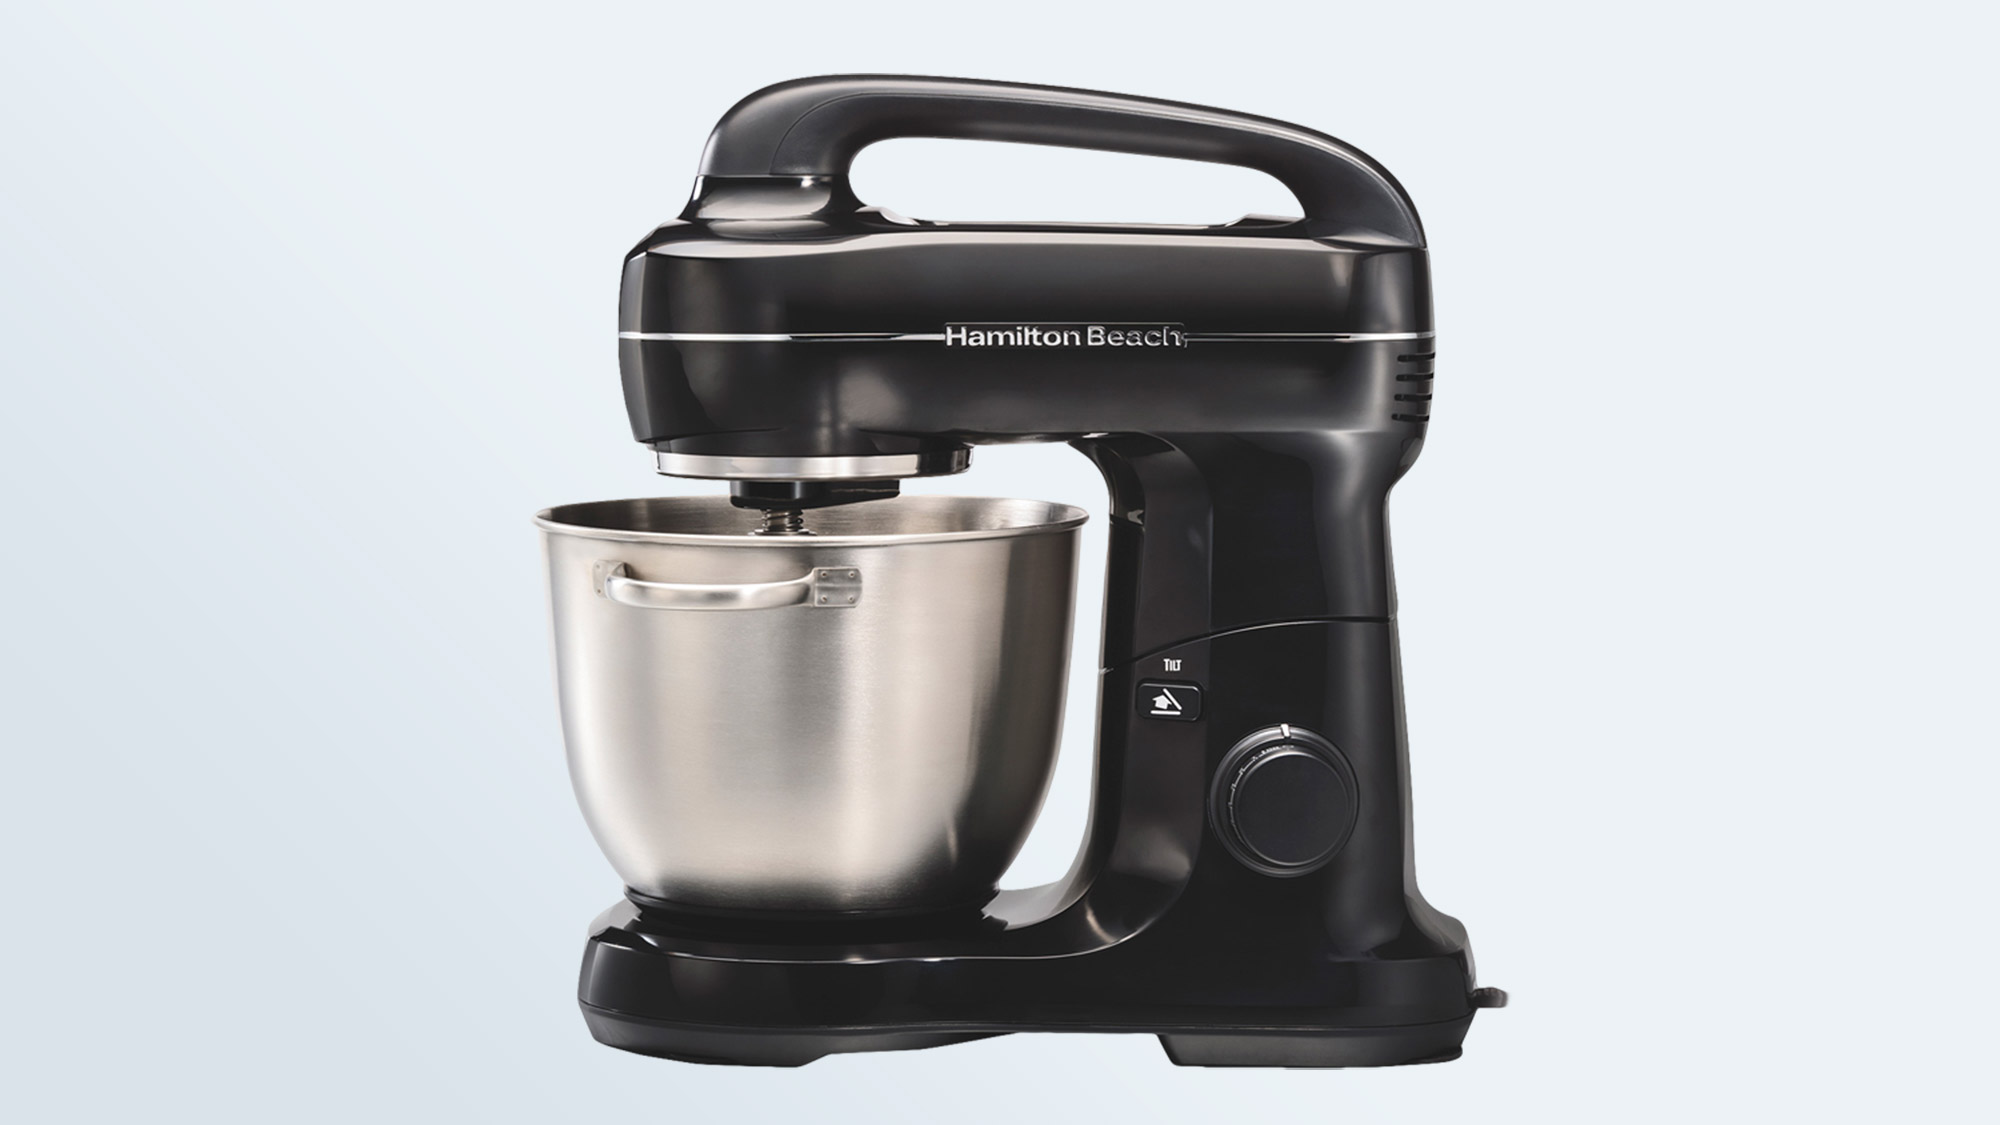 The best stand mixers: Hamilton Beach 7-speed stand mixer